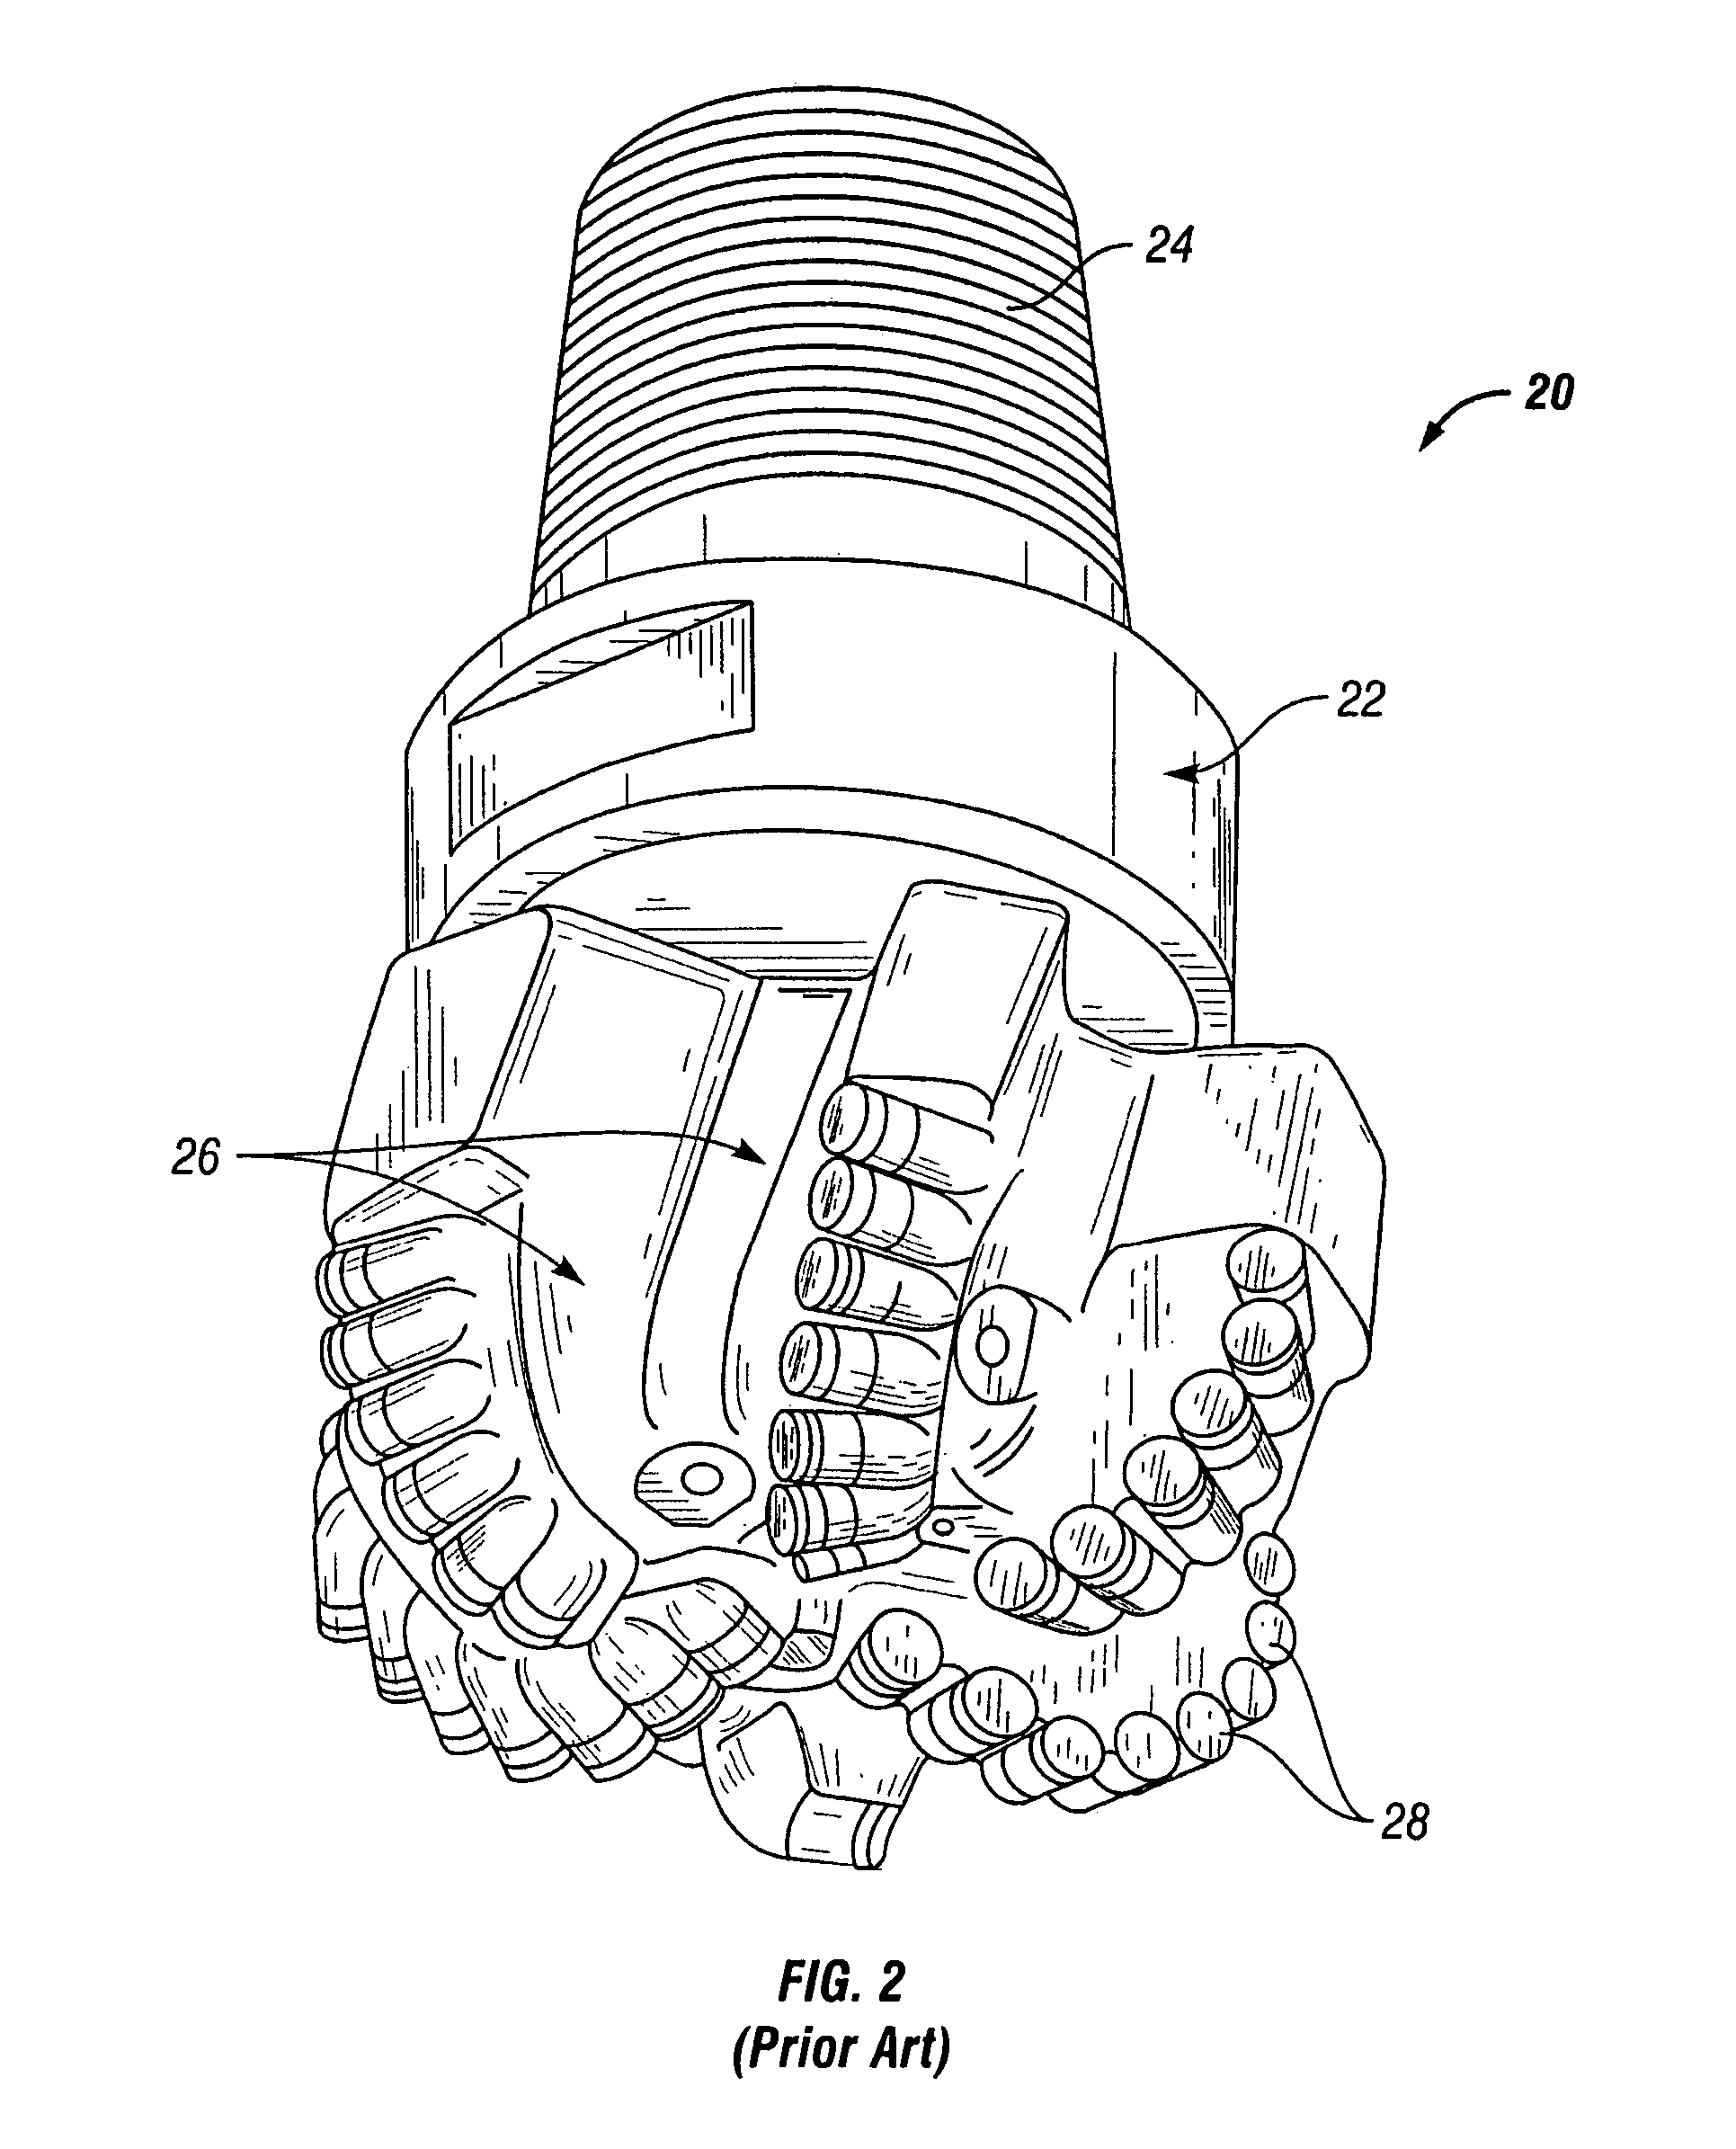 Methods for modeling wear of fixed cutter bits and for designing and optimizing fixed cutter bits